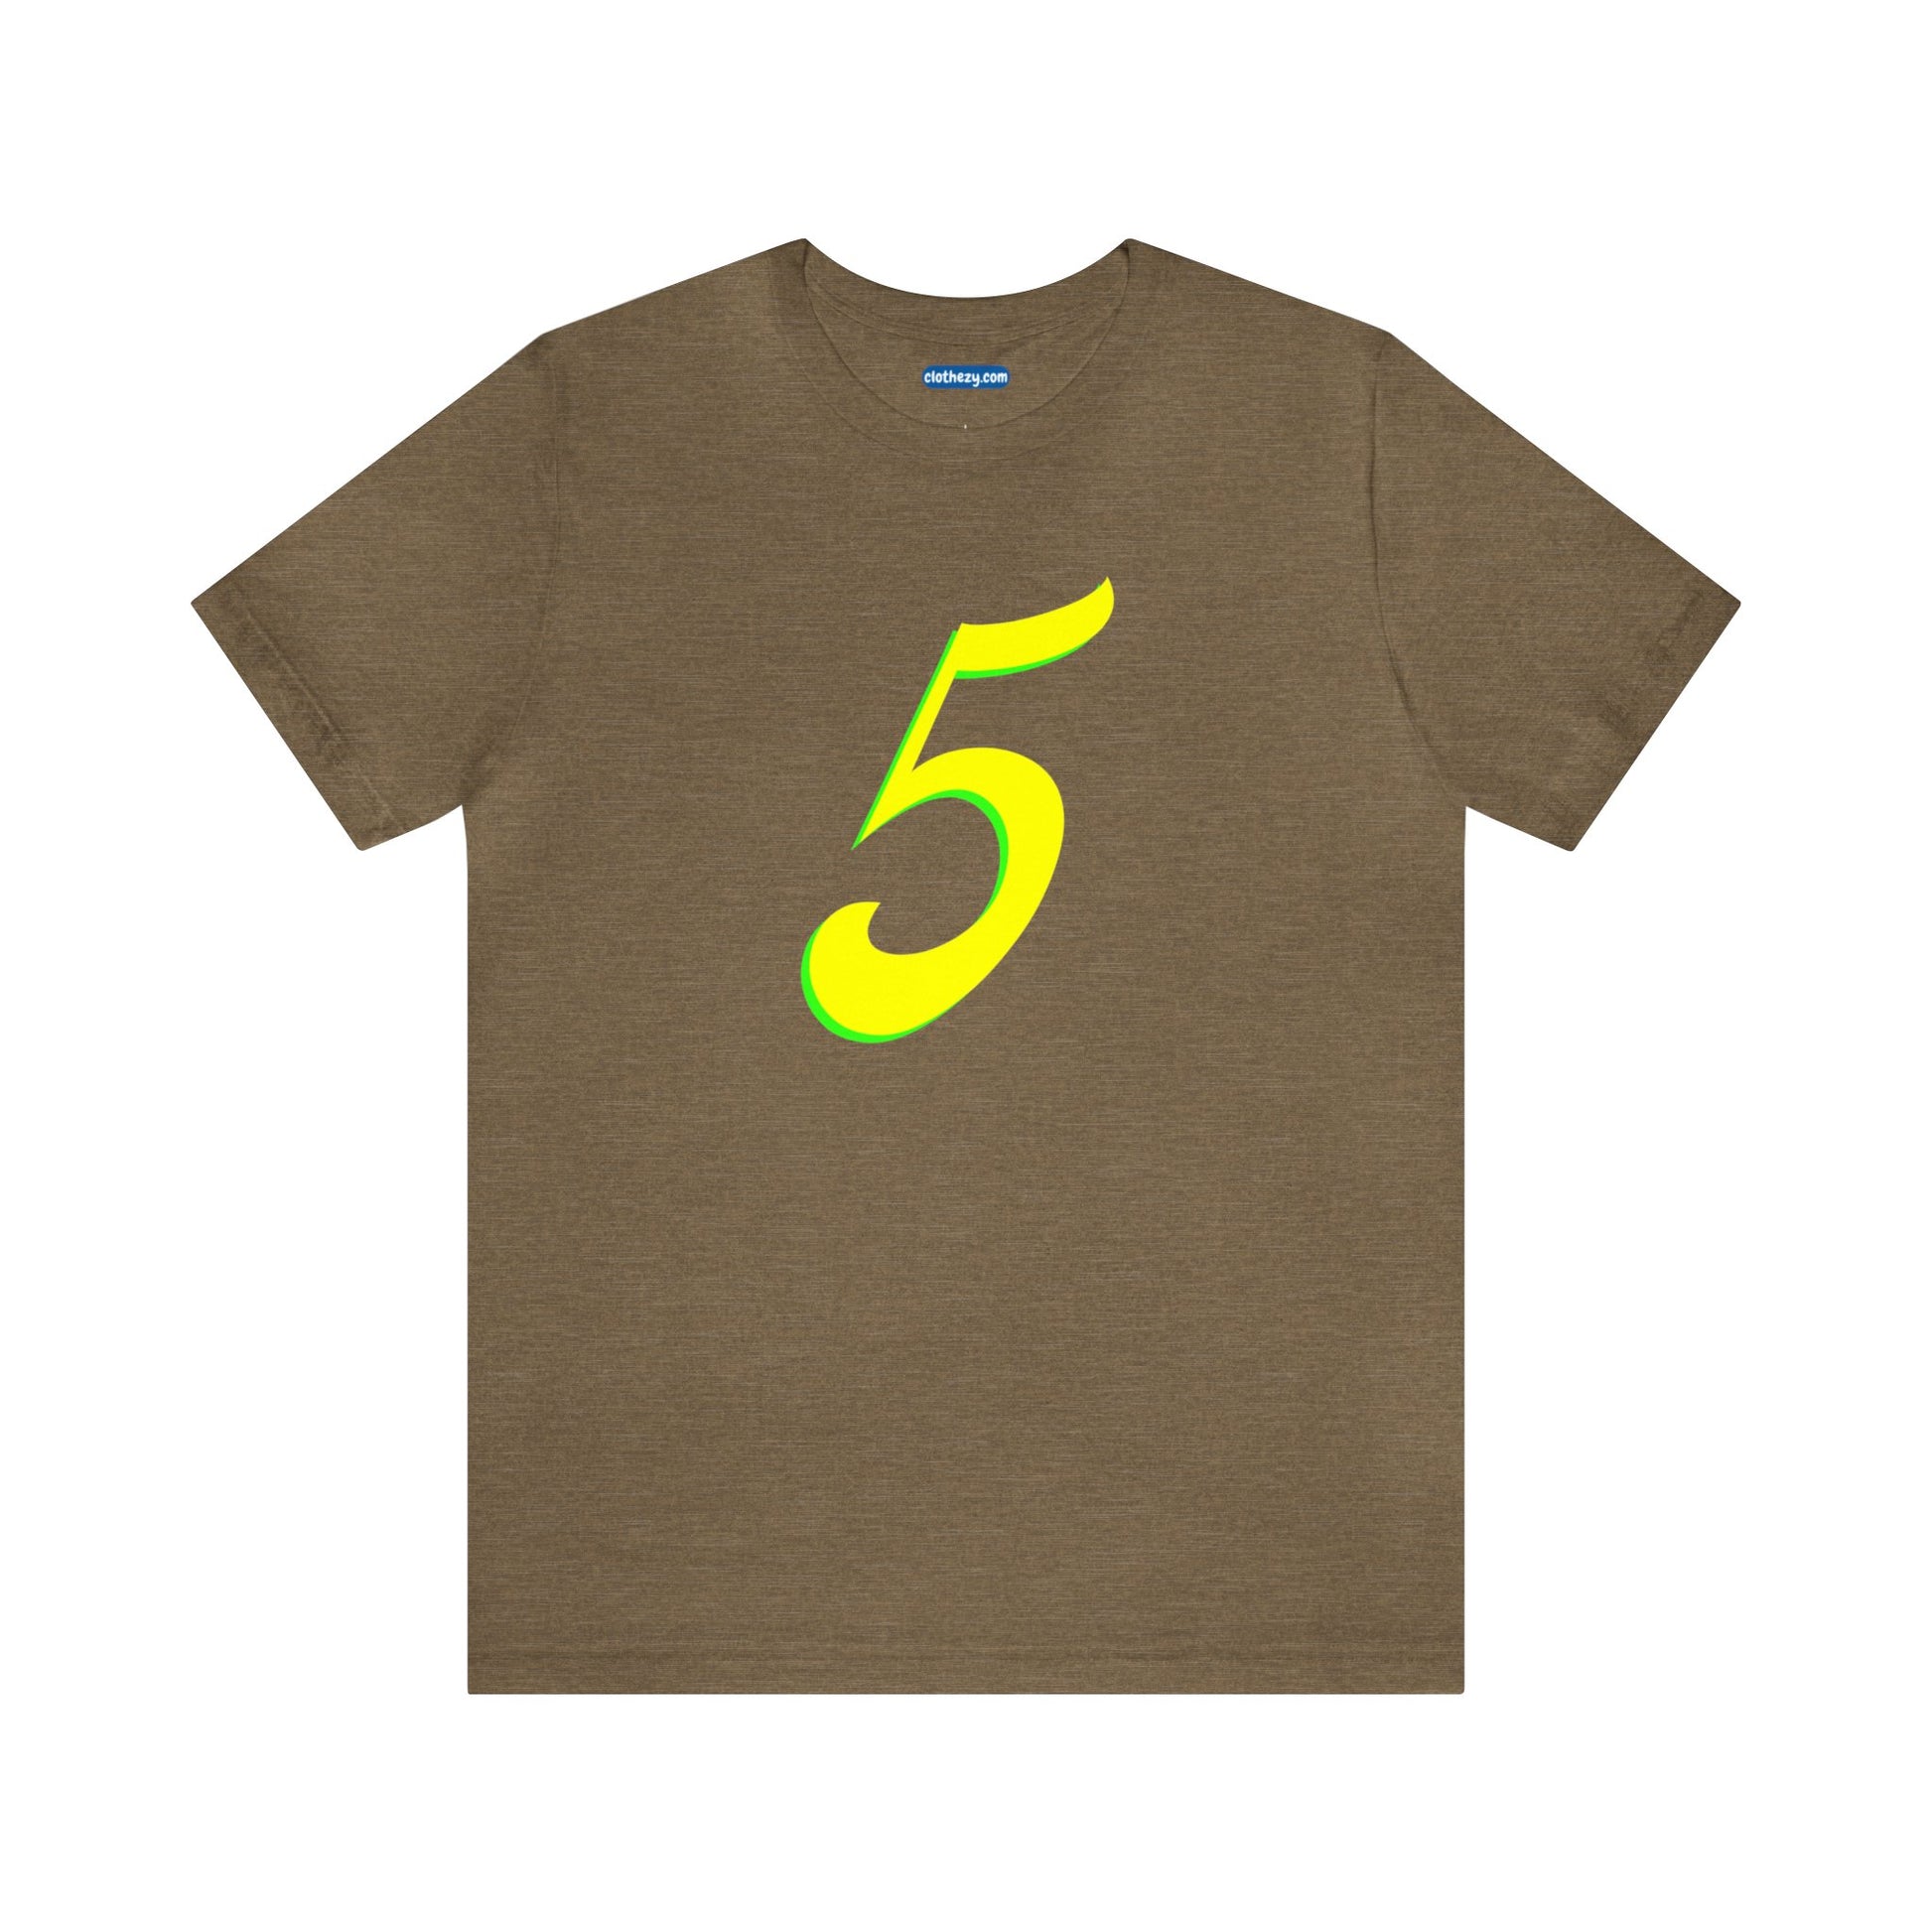 Number 5 Design - Soft Cotton Tee for birthdays and celebrations, Gift for friends and family, Multiple Options by clothezy.com in Olive Heather Size Small - Buy Now